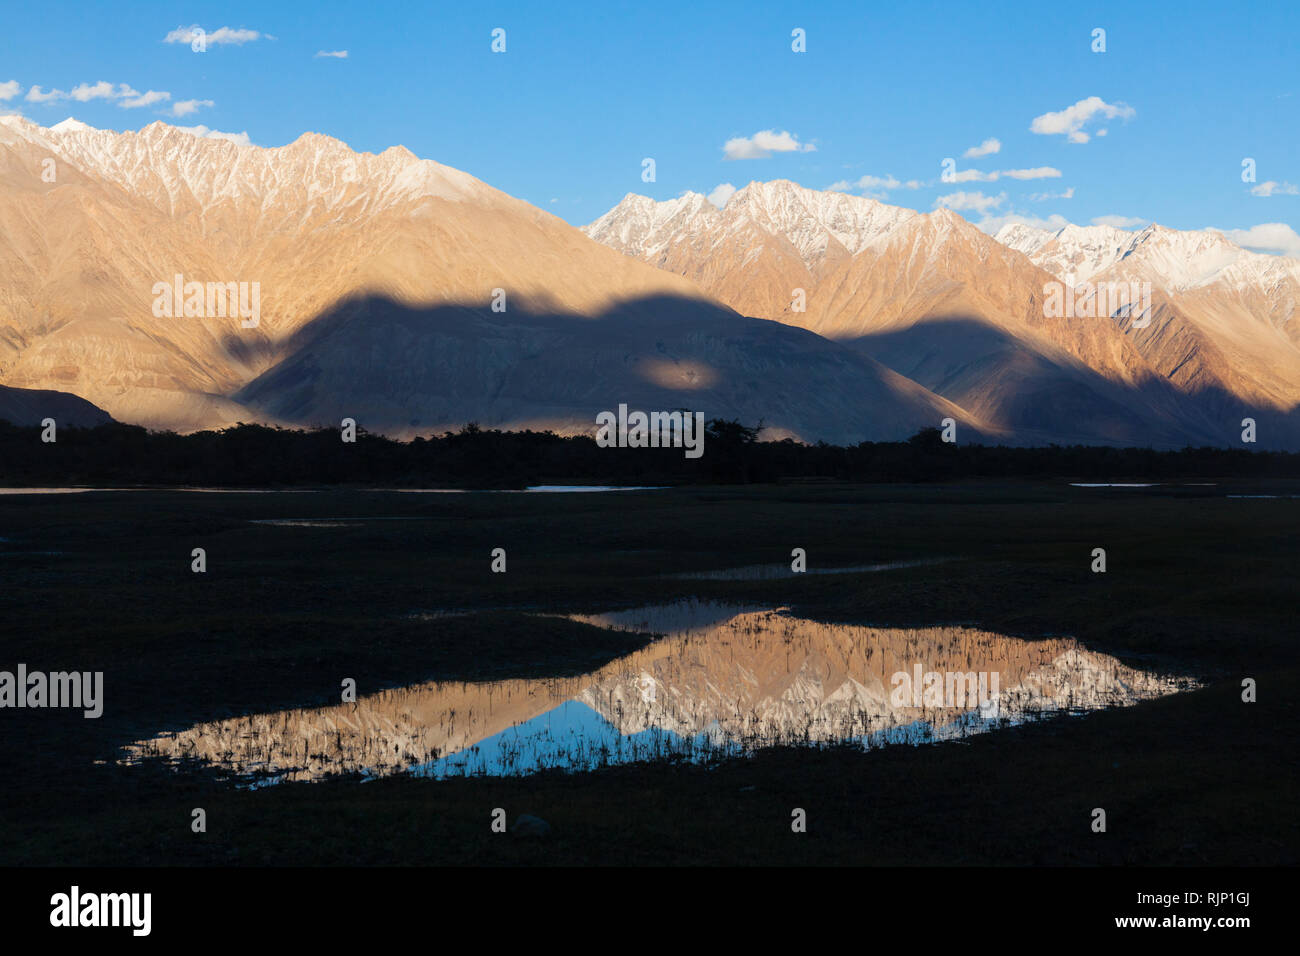 Landscape with slightly snow-capped mountains reflecting in the water, area of Hunder, Nubra Valley, Ladakh, Jammu and Kashmir, India Stock Photo